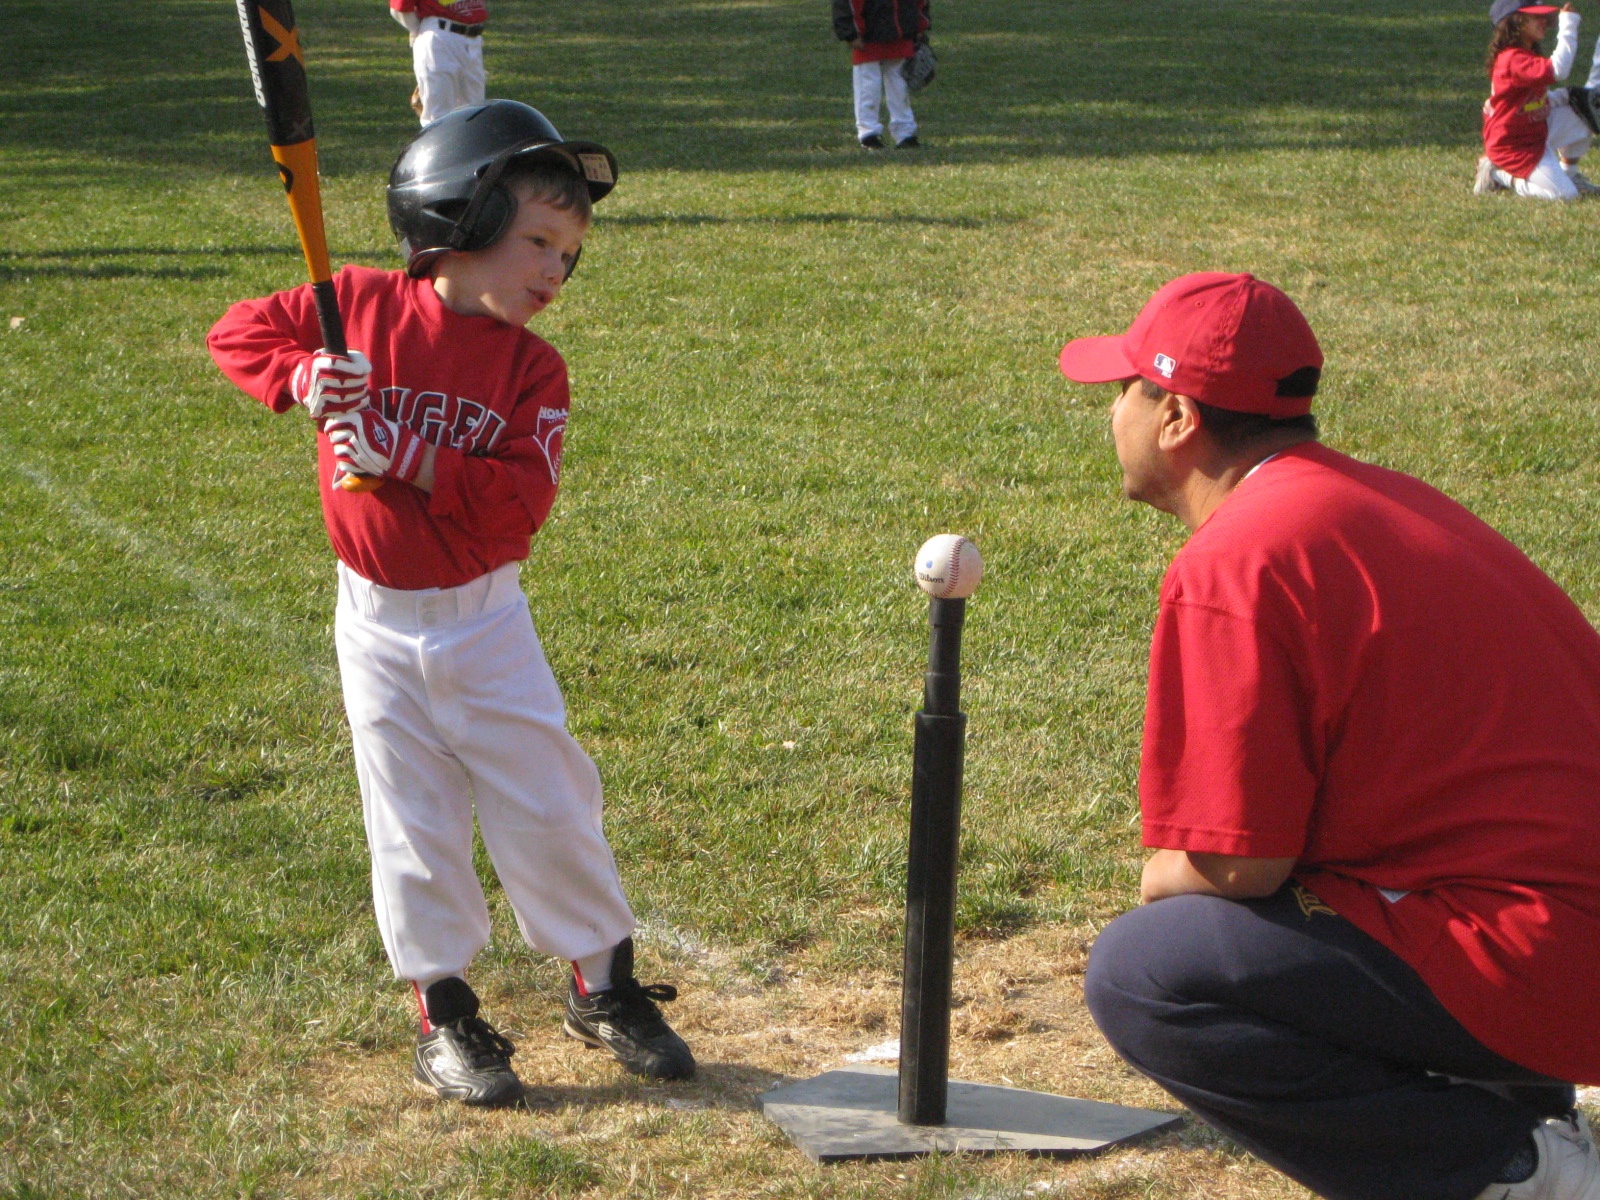 First Year of Little League